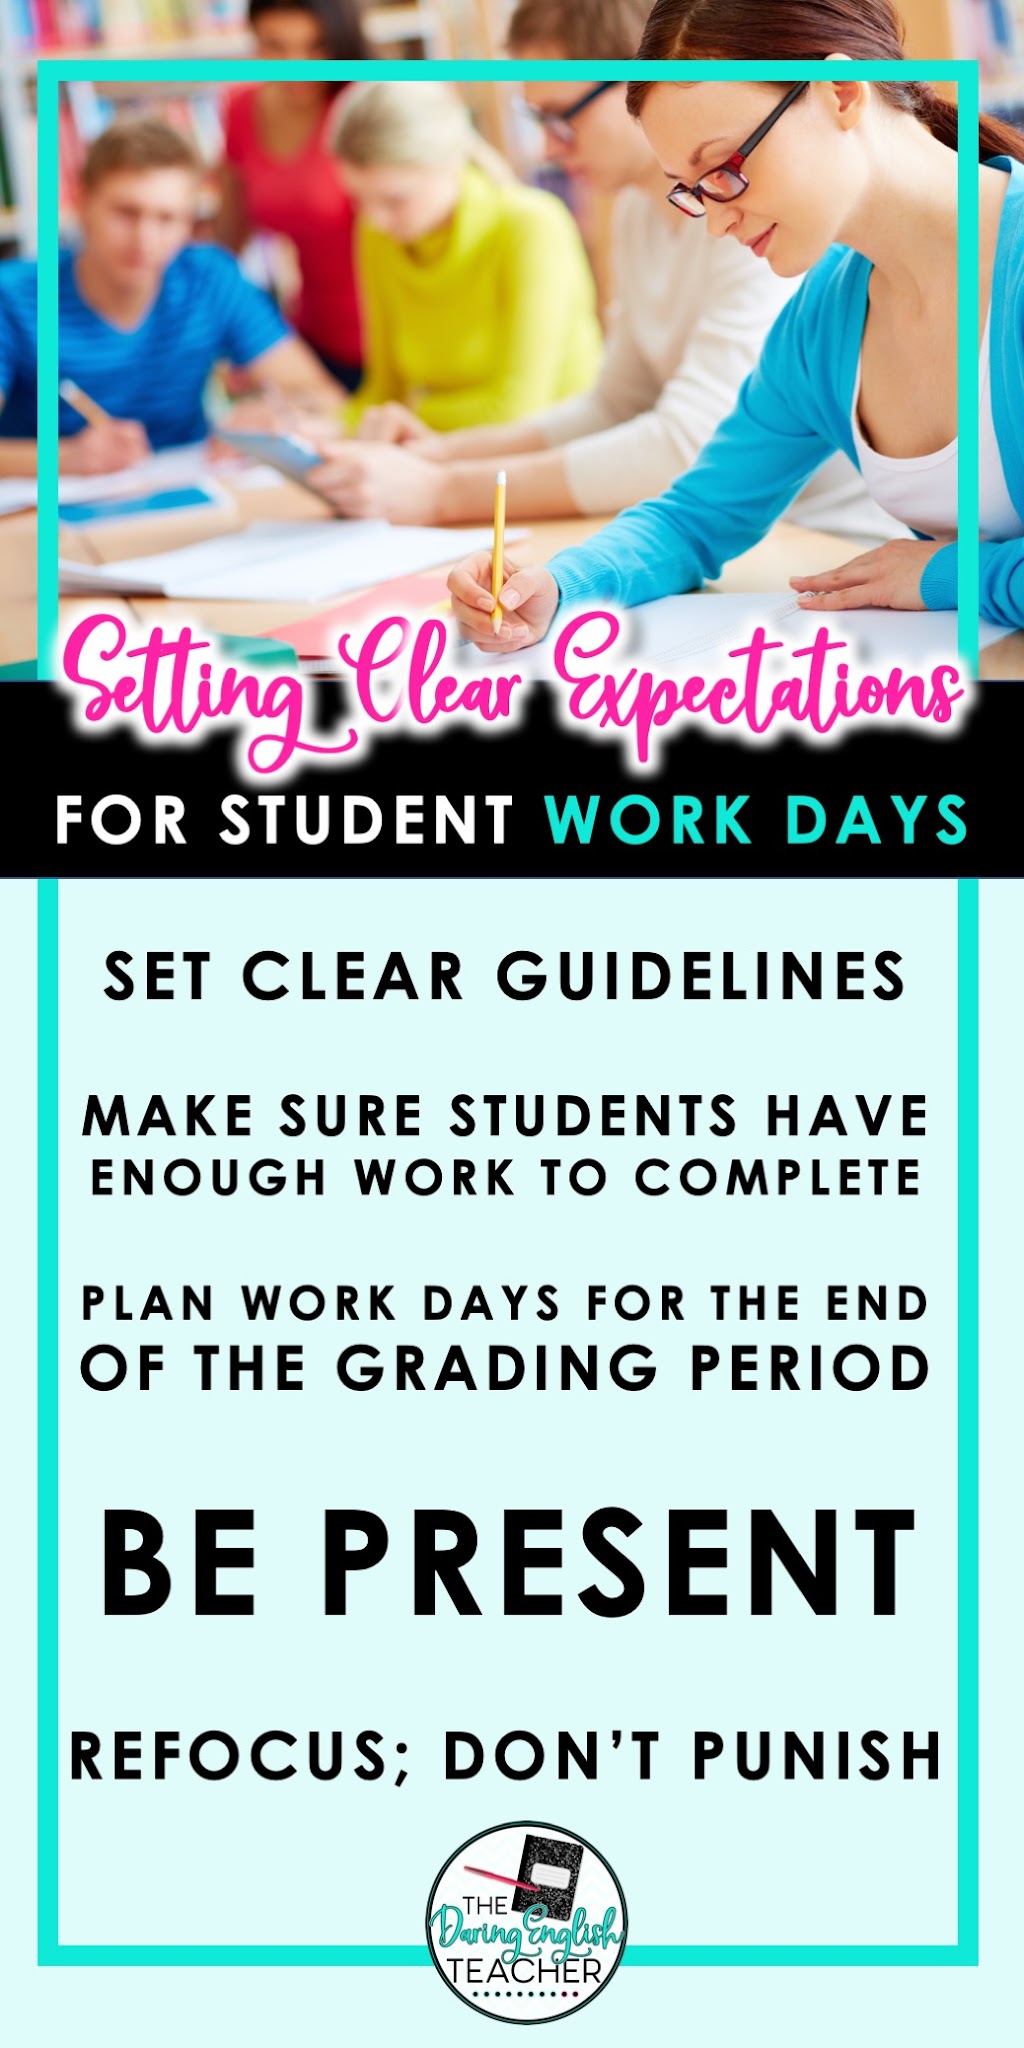 Setting Clear Expectations for Student Work Days